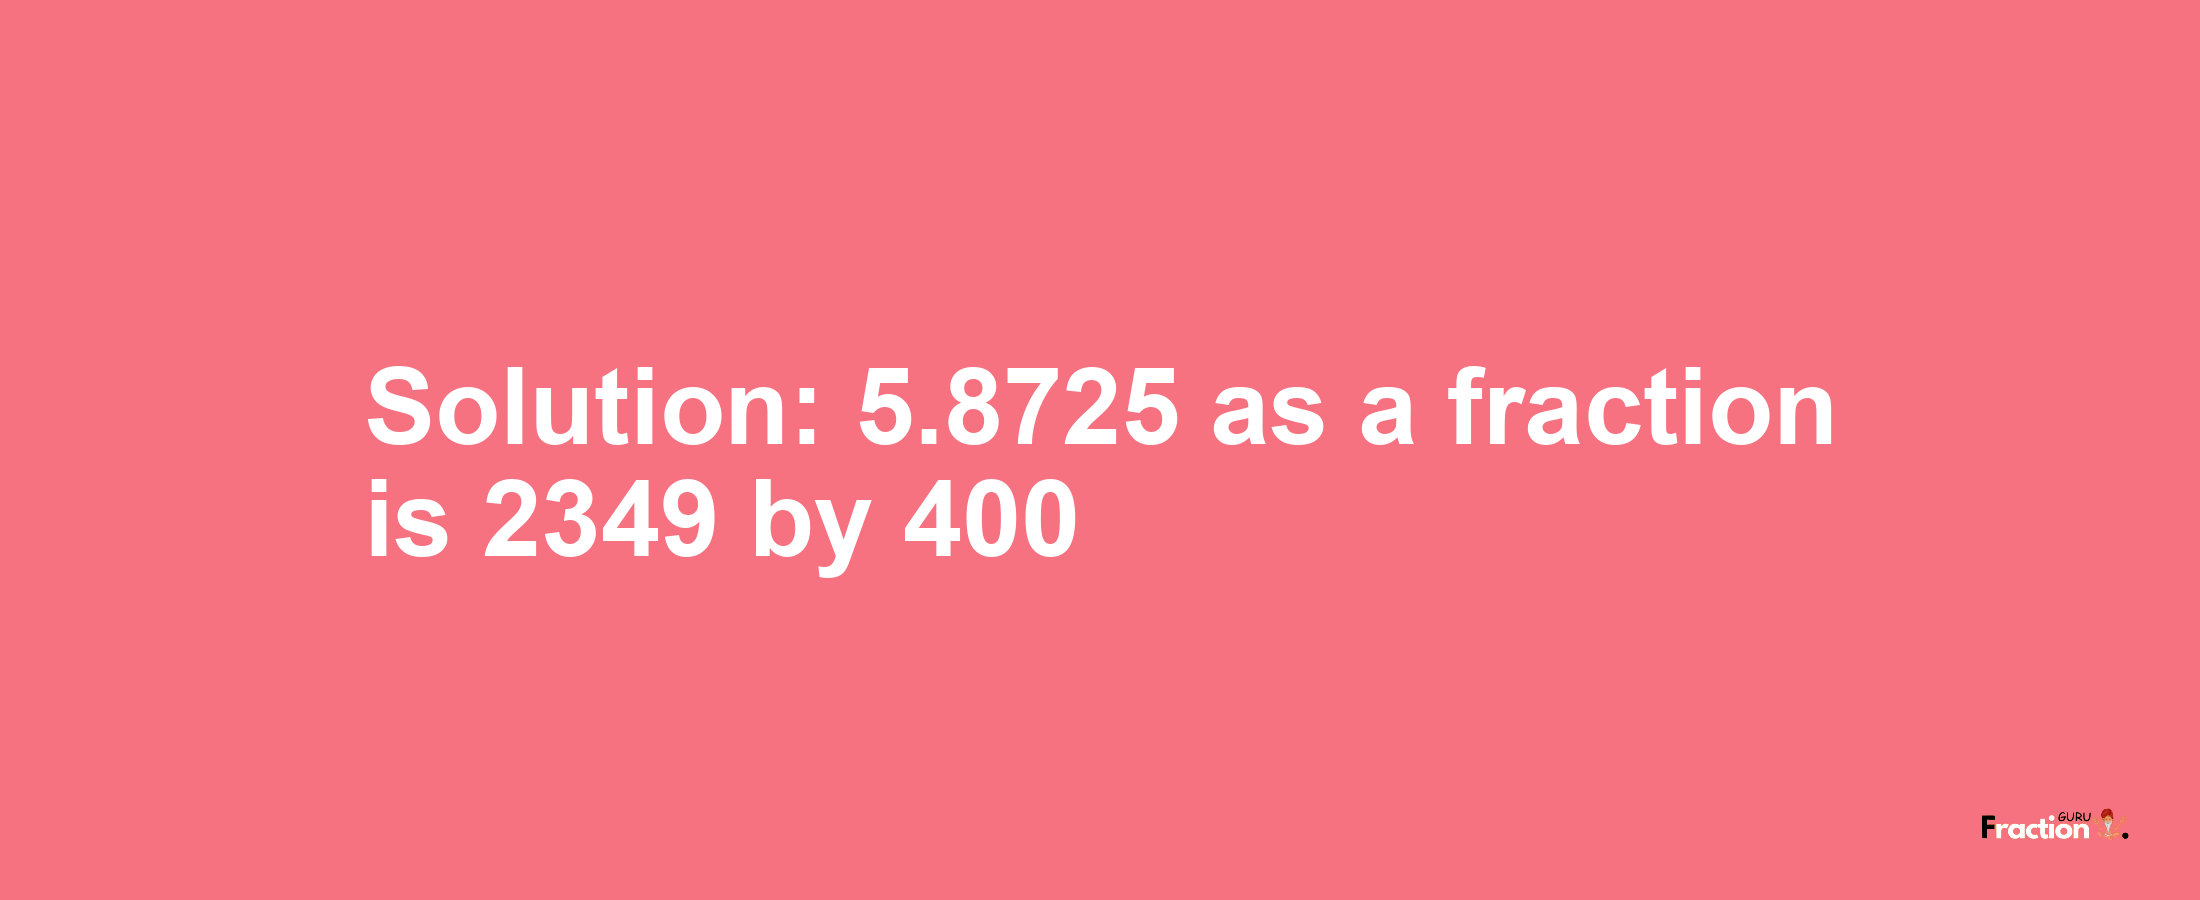 Solution:5.8725 as a fraction is 2349/400